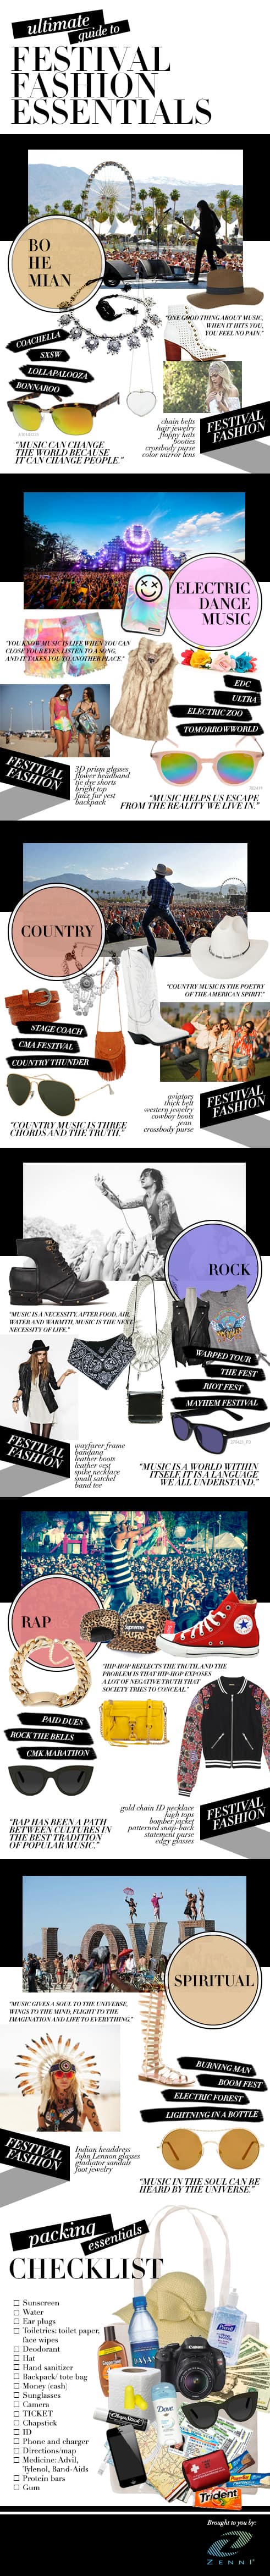 Ultimate Guide to Music Festival Fashion Essentials - Infographic